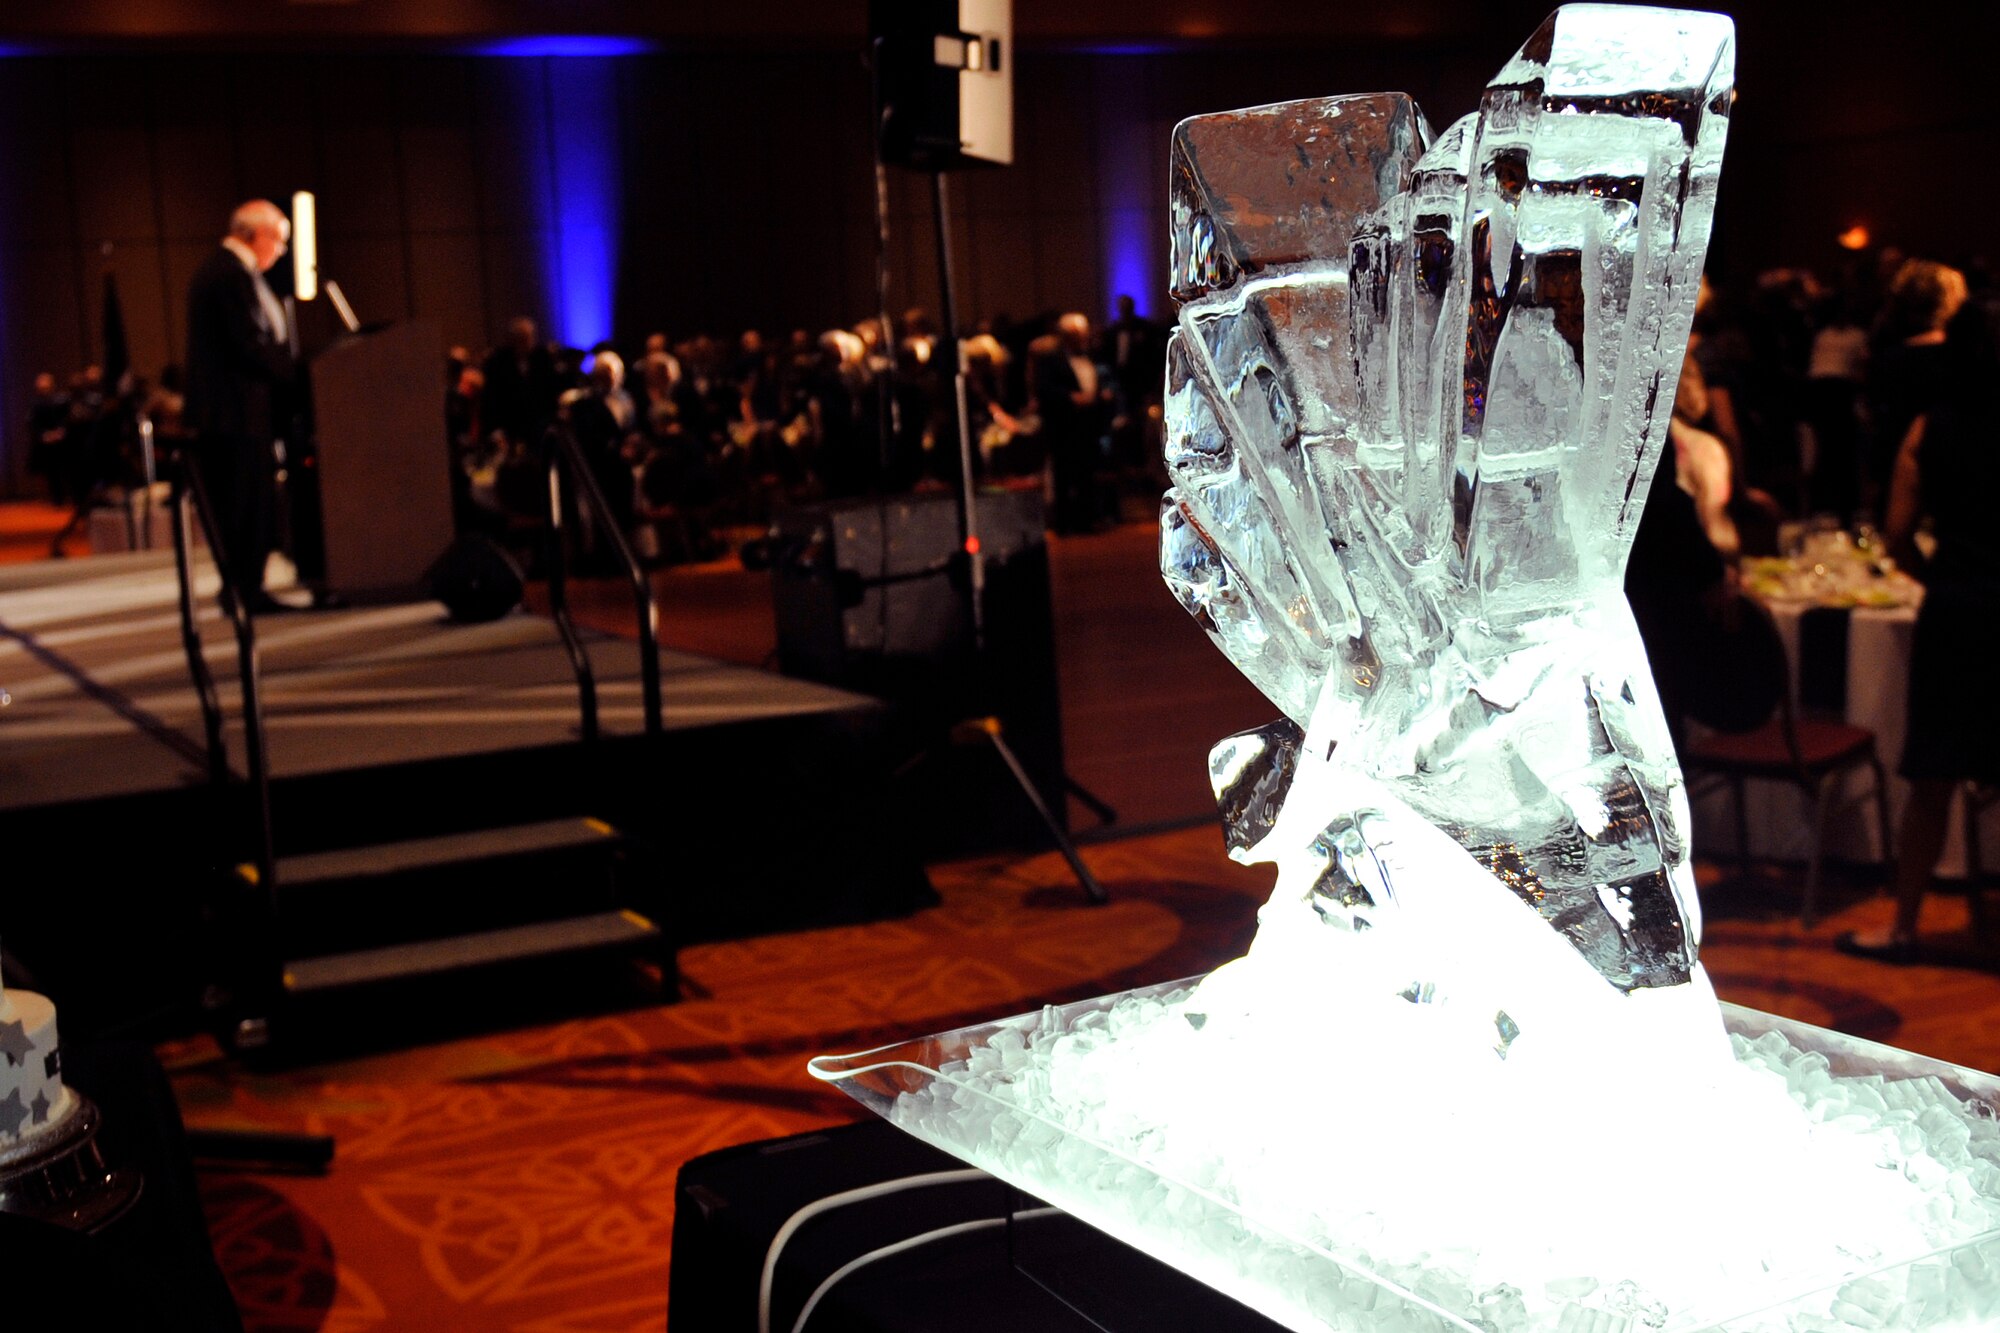 Dave Webber, 55th Wing Birthday Ball master of ceremonies, speaks next to the events ice sculpture inside the Embassy Suites ballroom in La Vista, Nebraska for the 2015 Birthday Ball, May 16. The Birthday Ball is a formal celebration recognizing the wing’s proud heritage as well as its current mission and role in the U.S. Air Force. (U.S. Air Force photo by Jeff W. Gates/Released)